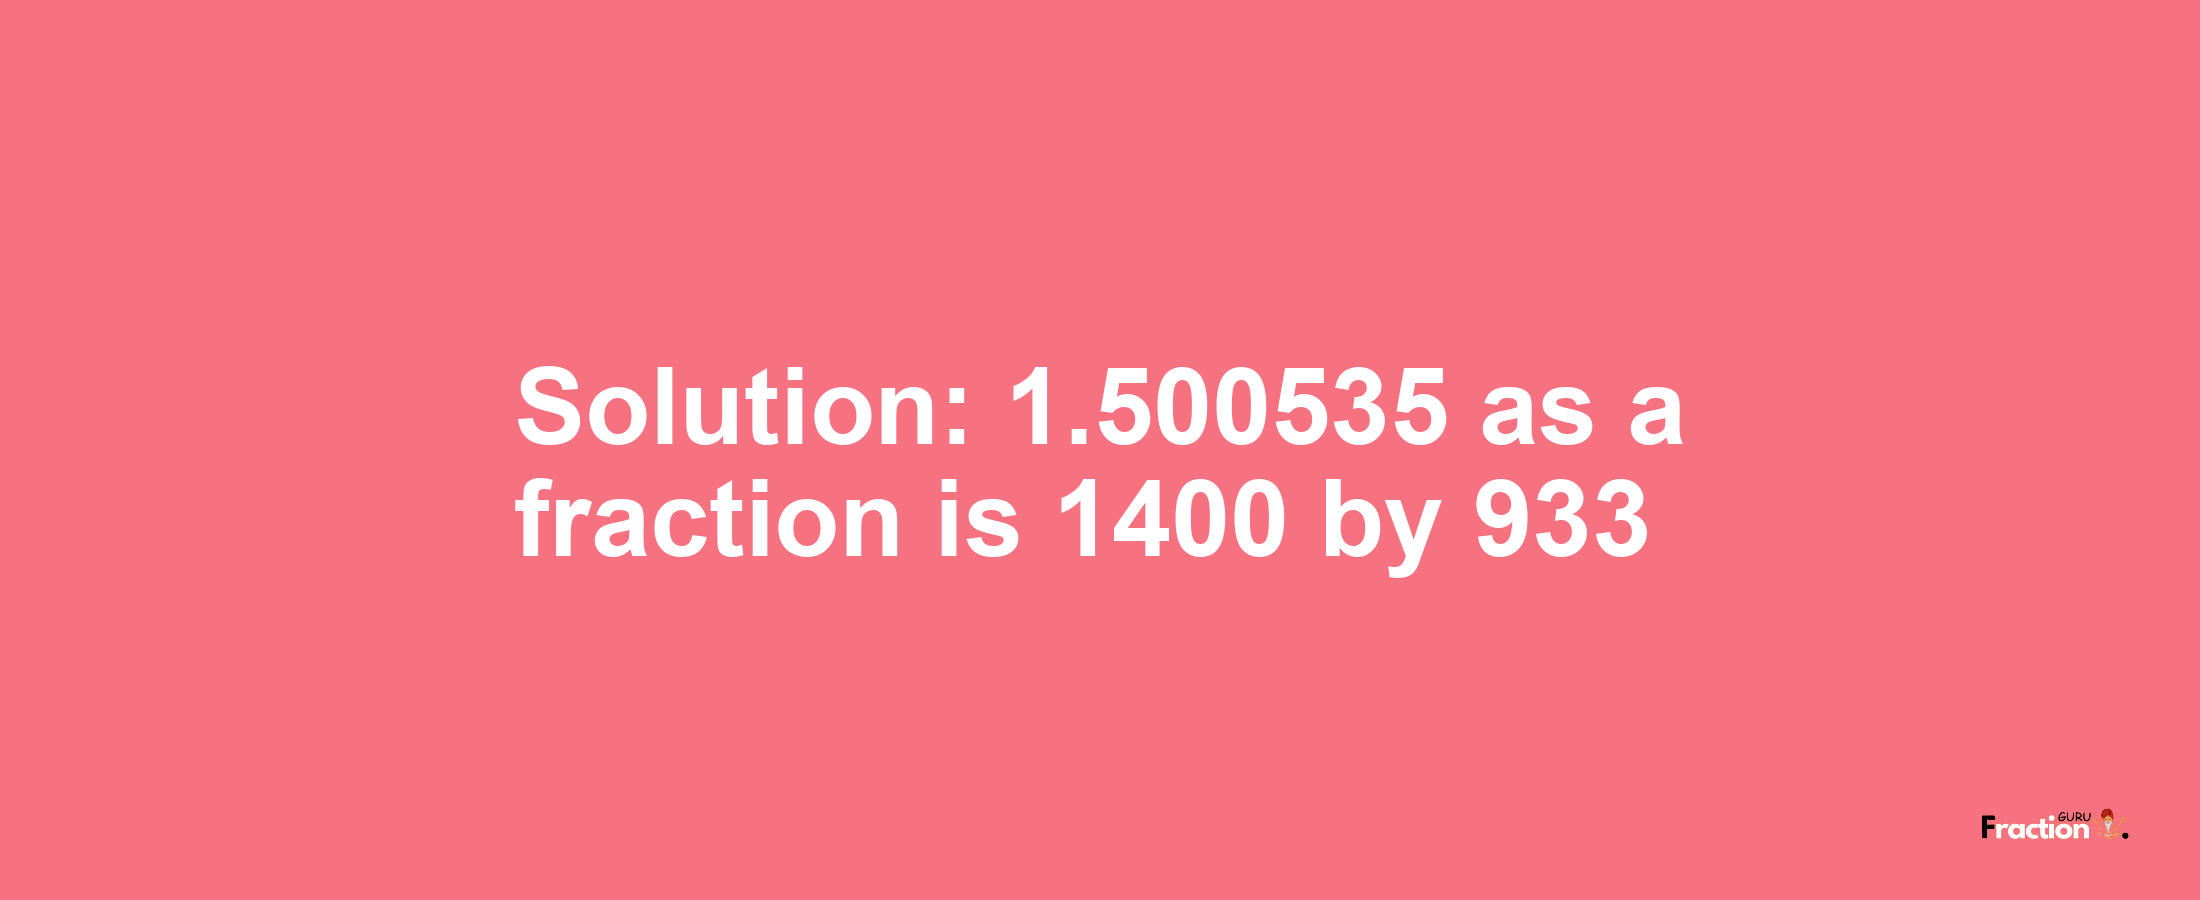 Solution:1.500535 as a fraction is 1400/933